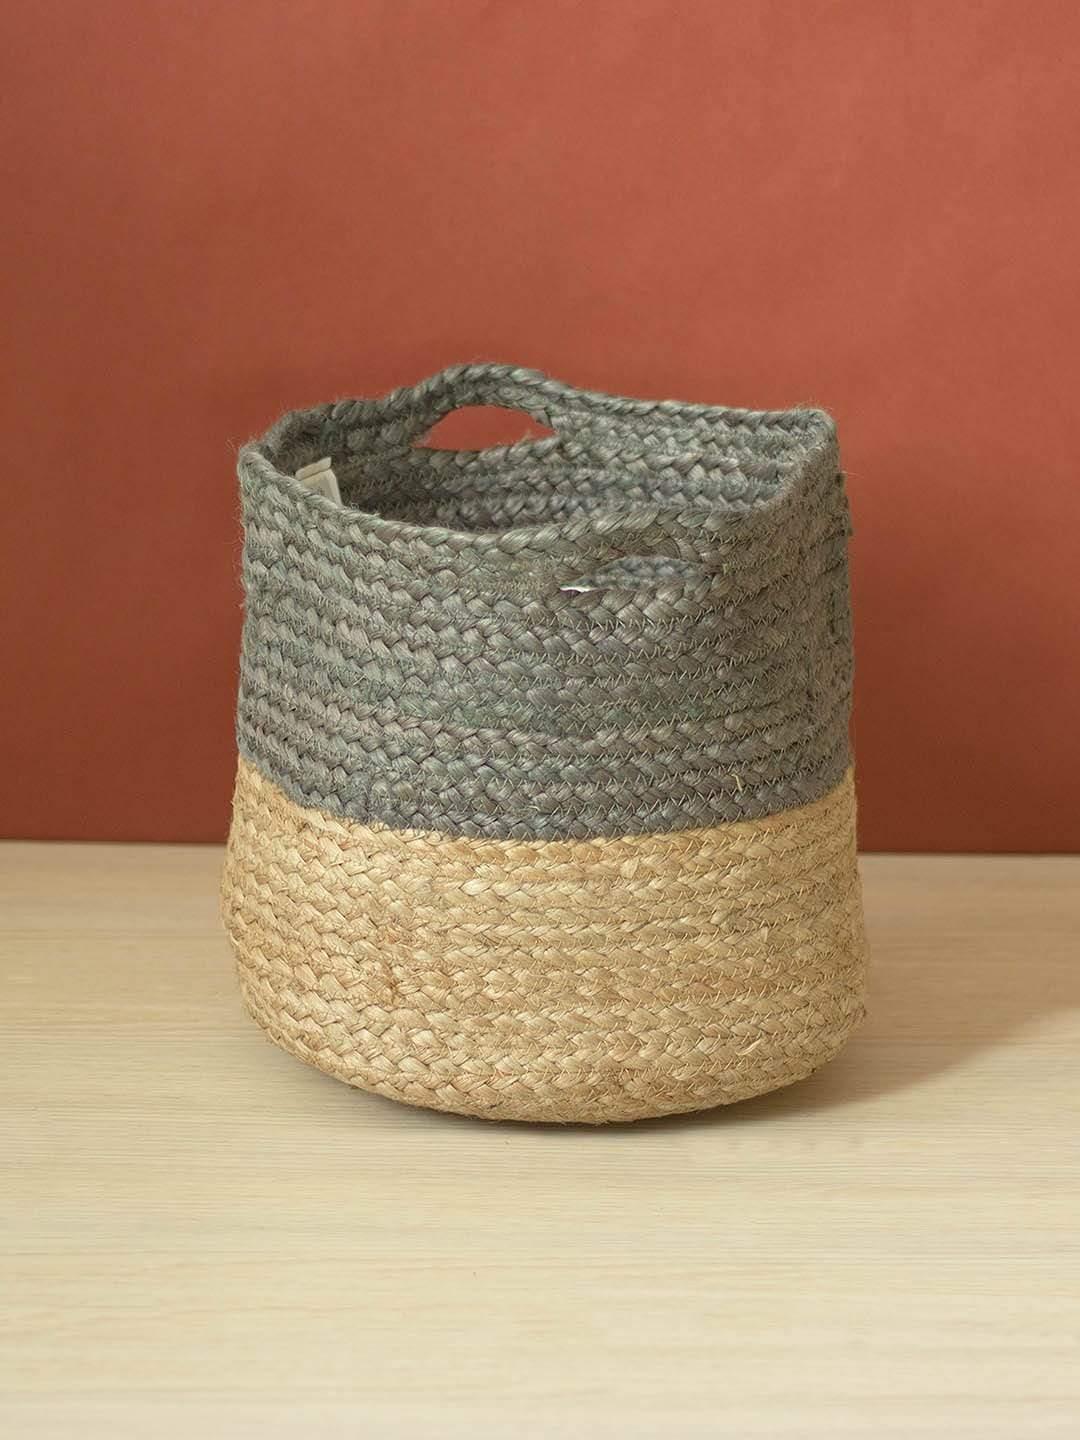 Jute Storage BasketFrequently Asked QuestionsQ. What can I put in here?A. Knick knacks, diddly squats, doodads and whatchamacallits.
Q. Where can I put this?A. In a place for everythinJute Storage BasketThe Wishing Chair